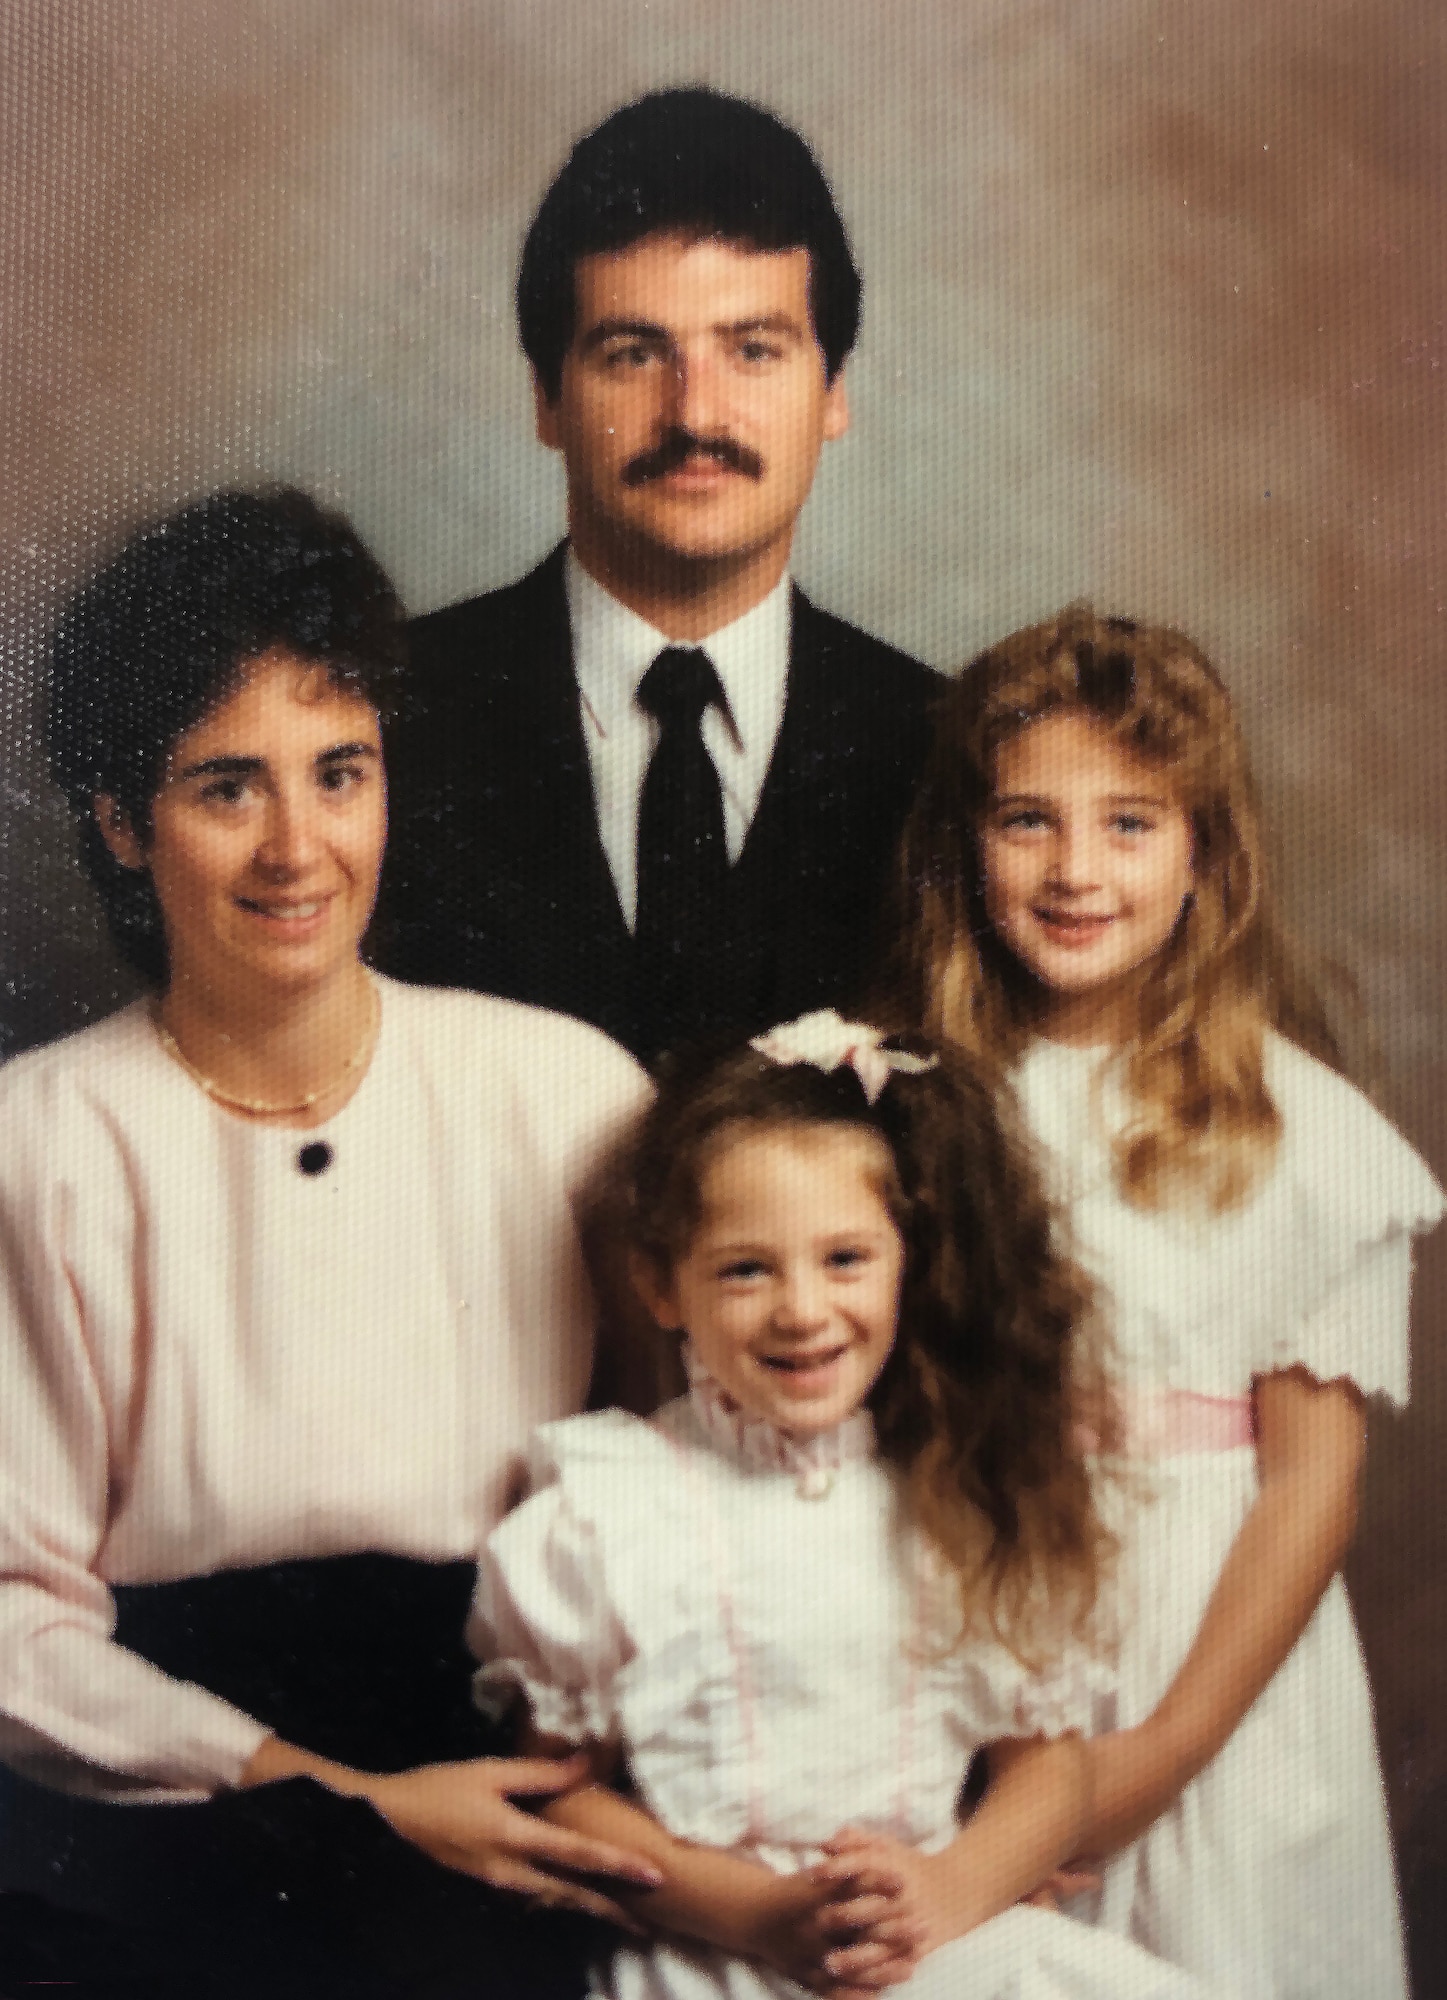 Andrea Hunwick poses for a photo with her parents and sister, around the time of her mother's graduation, 1990. (Courtesy photo)